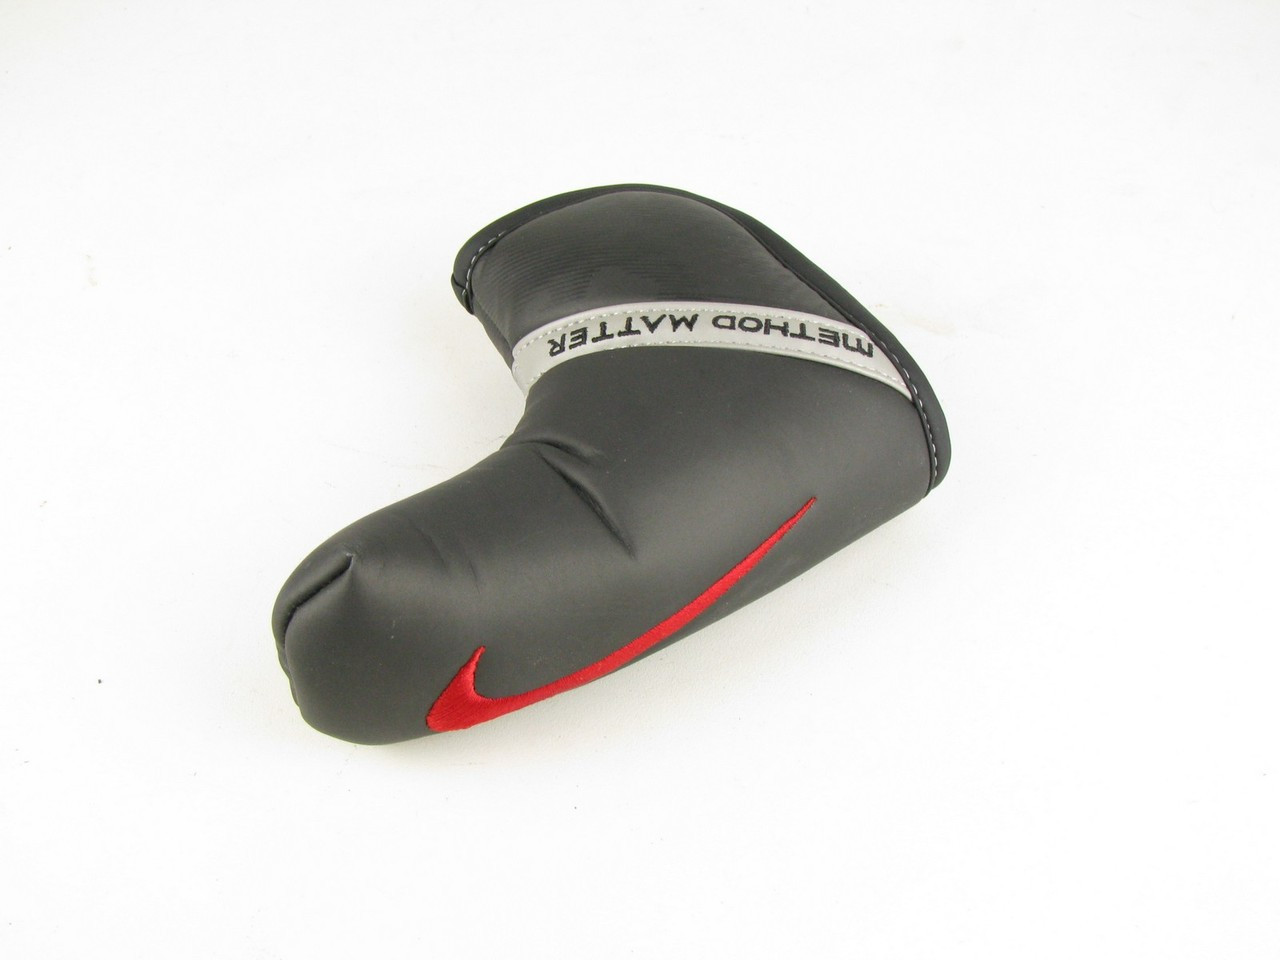 NEW Nike Method Matter Blade Putter Headcover - Clubs Covers Golf